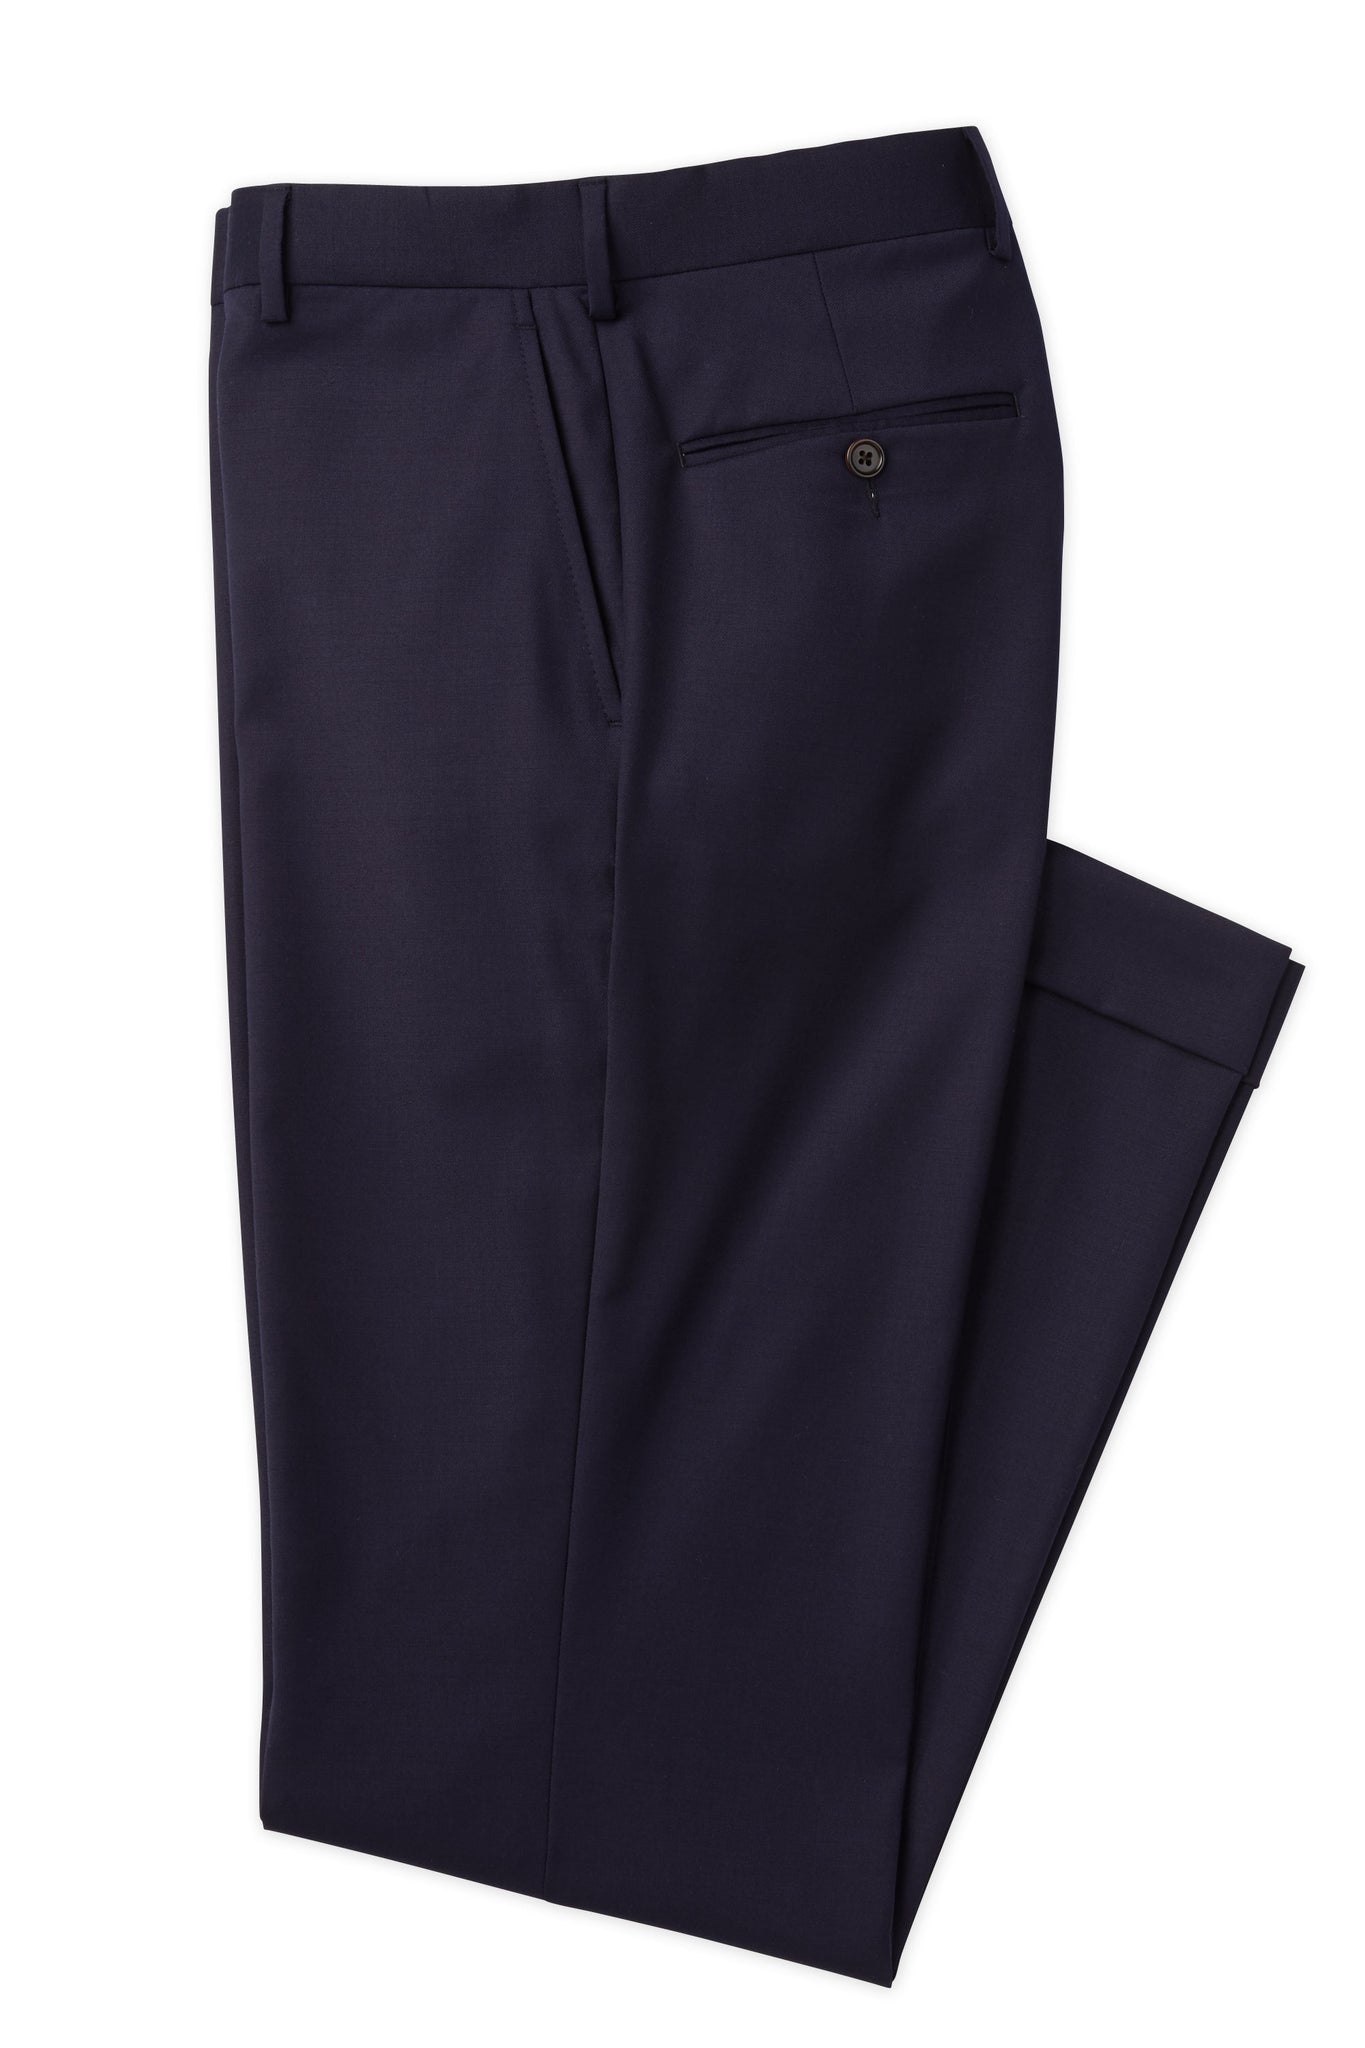 Trousers for men | Trousers, Trouser suits, Slim fit